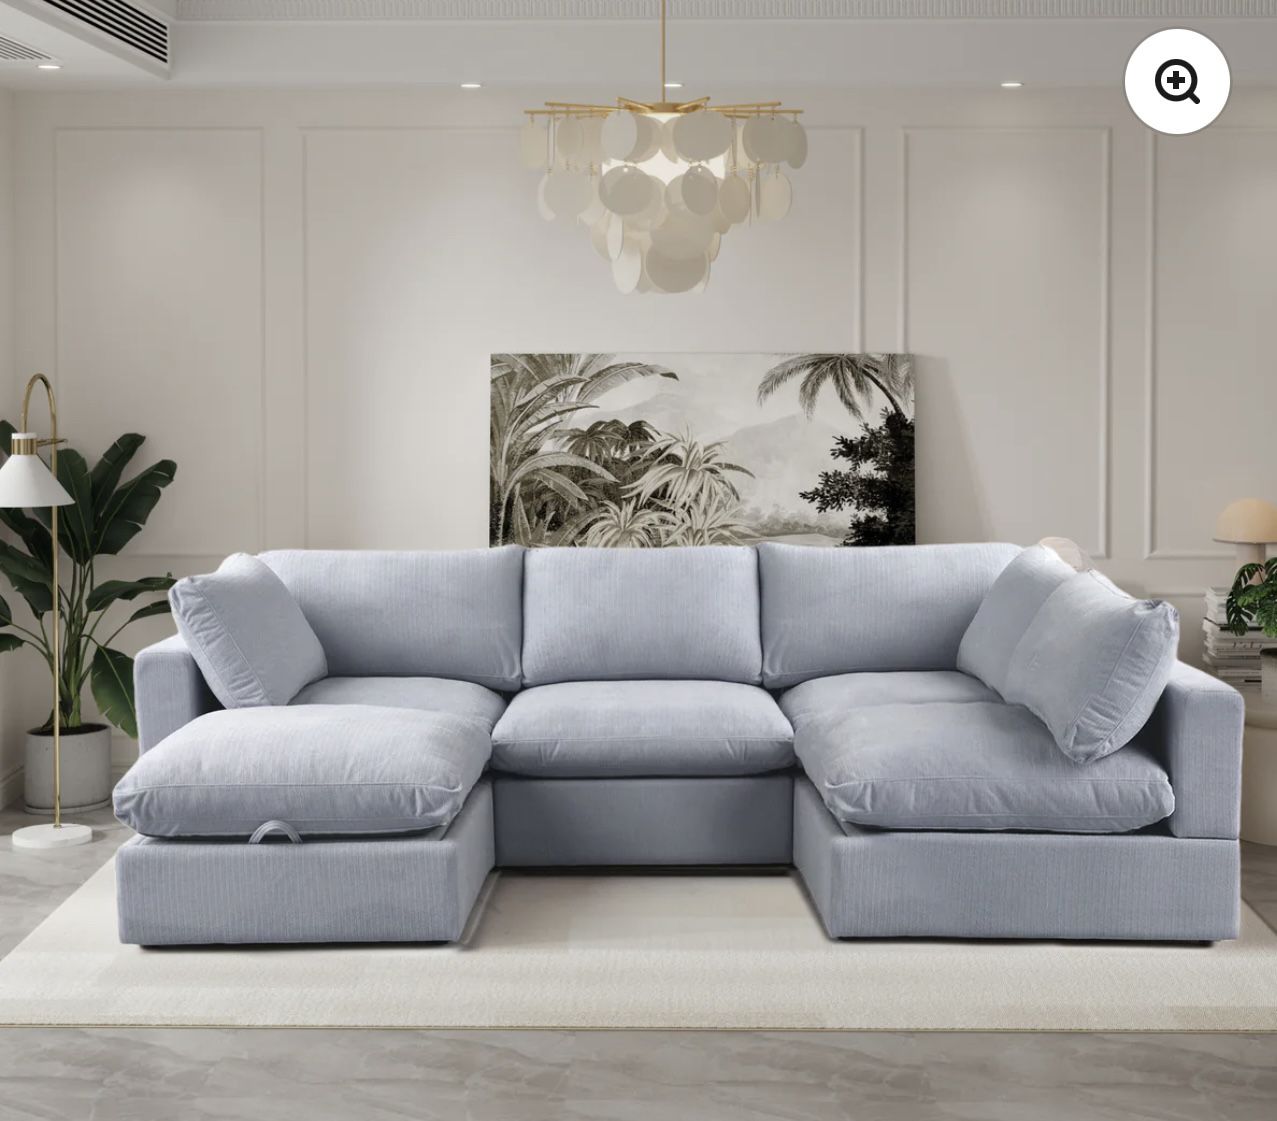 FREE DELIVERY!🚚Cloud Couch Sectional Light Grey 5 Piece Set 